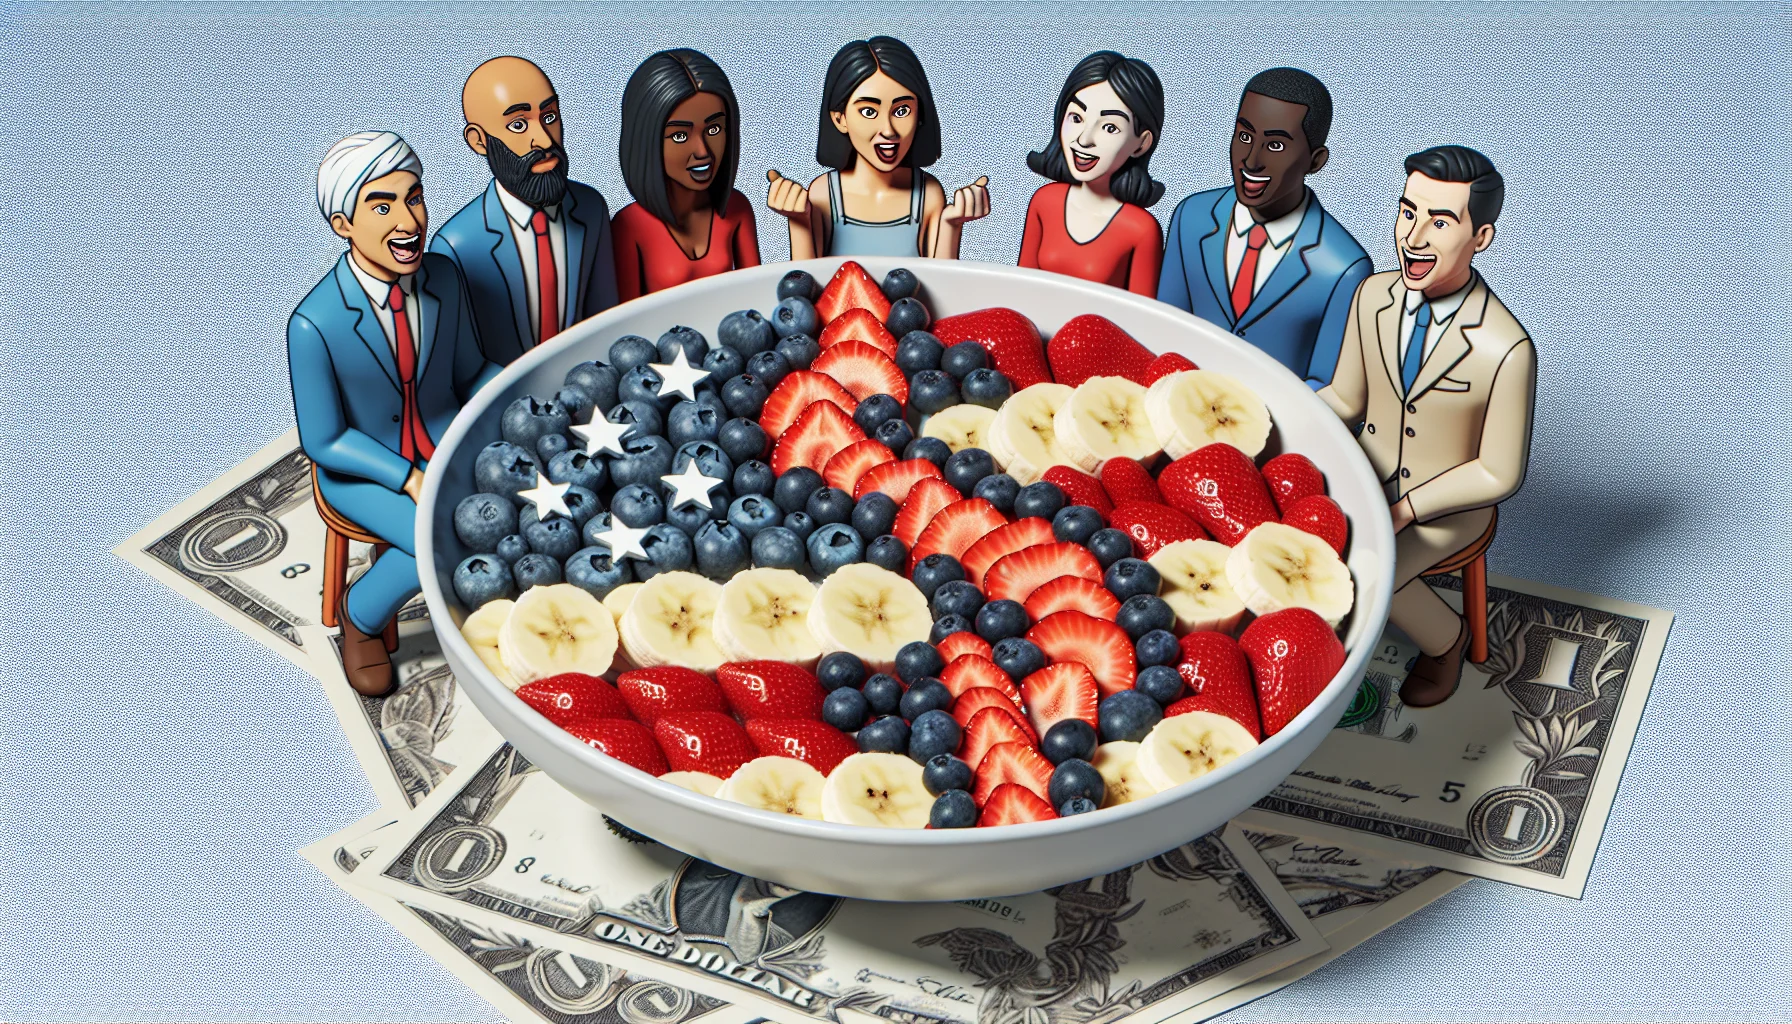 Envision a comical setting displaying a Patriotic Red, White, and Blue Fruit Salad. This multi-colored spread includes strawberries, blueberries, and sliced bananas, punctuating the vibrant colors of Patriotism. The salad is arranged in a creative fashion that playfully represents a 'dollar sign', signifying affordability. Around the salad, caricatures of people from diverse descents and both genders - Caucasian woman, Black man, Middle-Eastern man, South Asian Woman, Hispanic woman, and White man - show expressions of excitement and amusement. All this aims to promote the idea of eating healthy for less money.